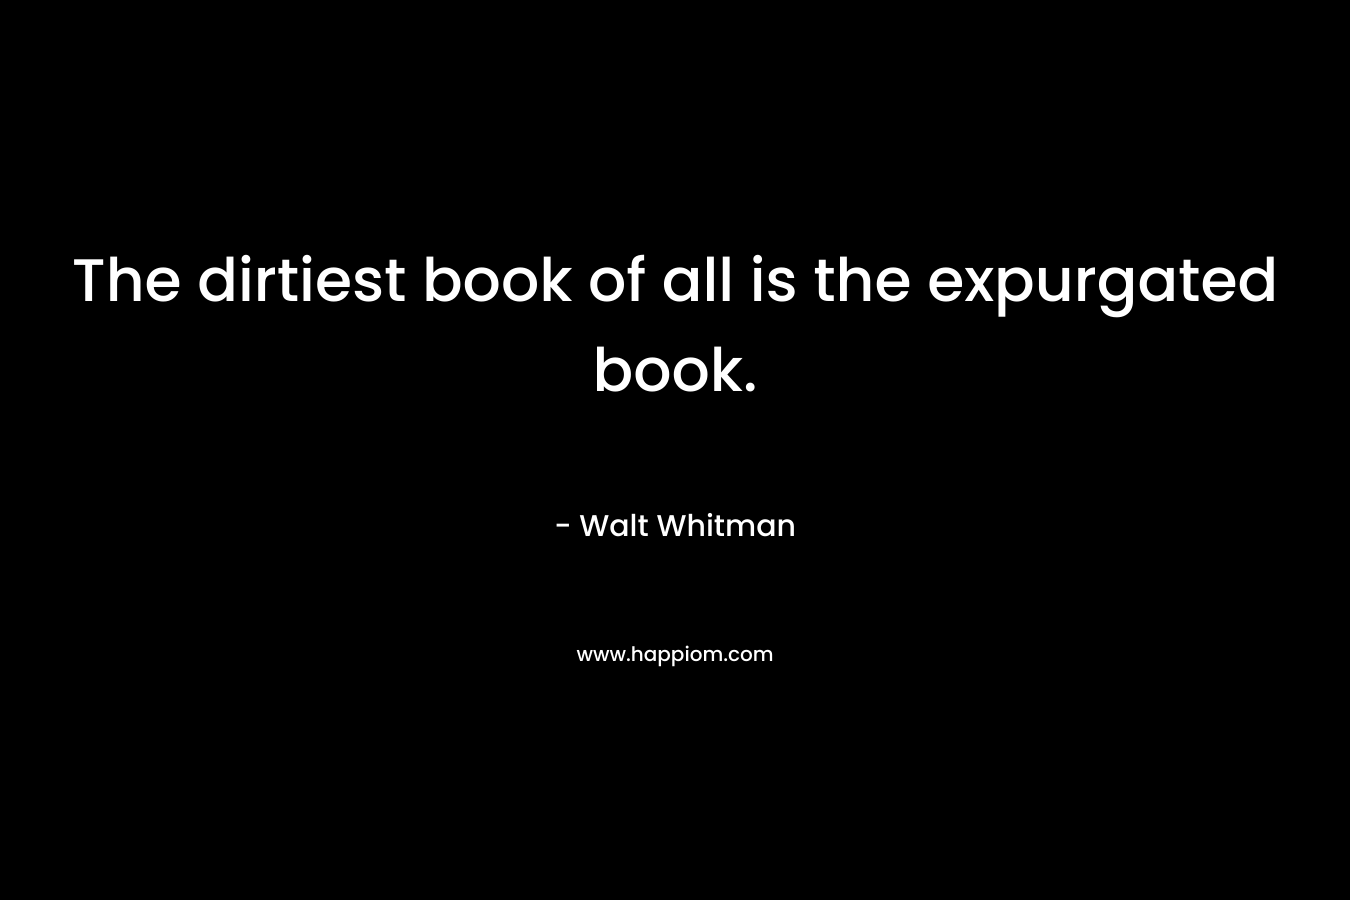 The dirtiest book of all is the expurgated book.